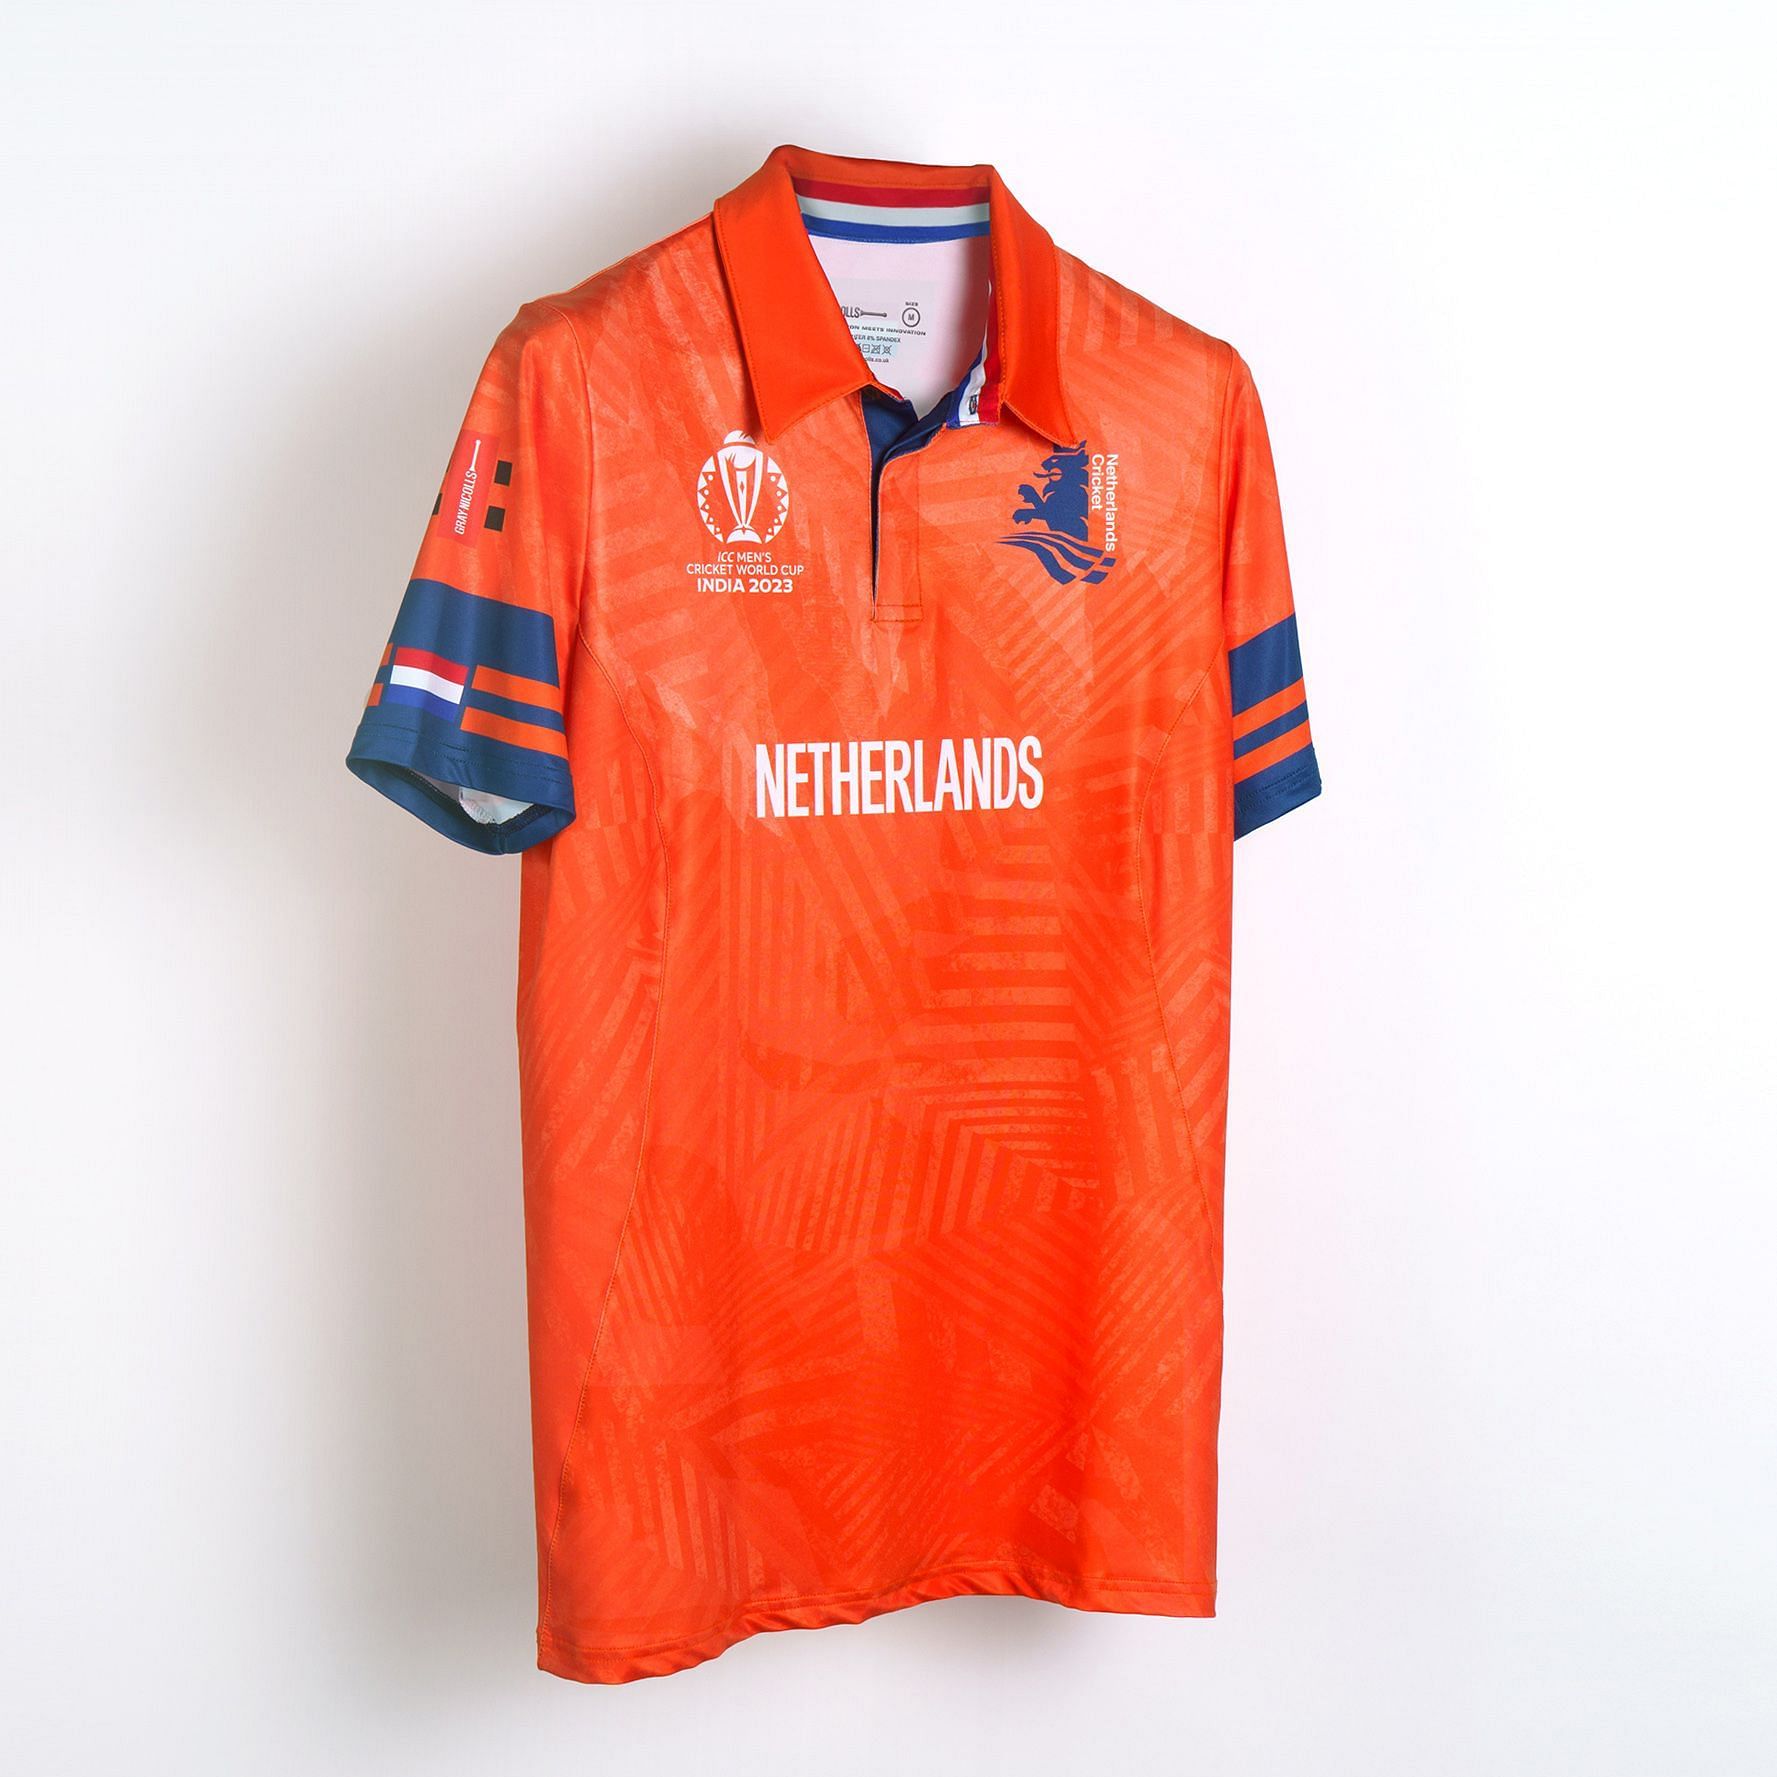 Netherlands jersey for the ODI World Cup 2023 [Cricket Netherlands]